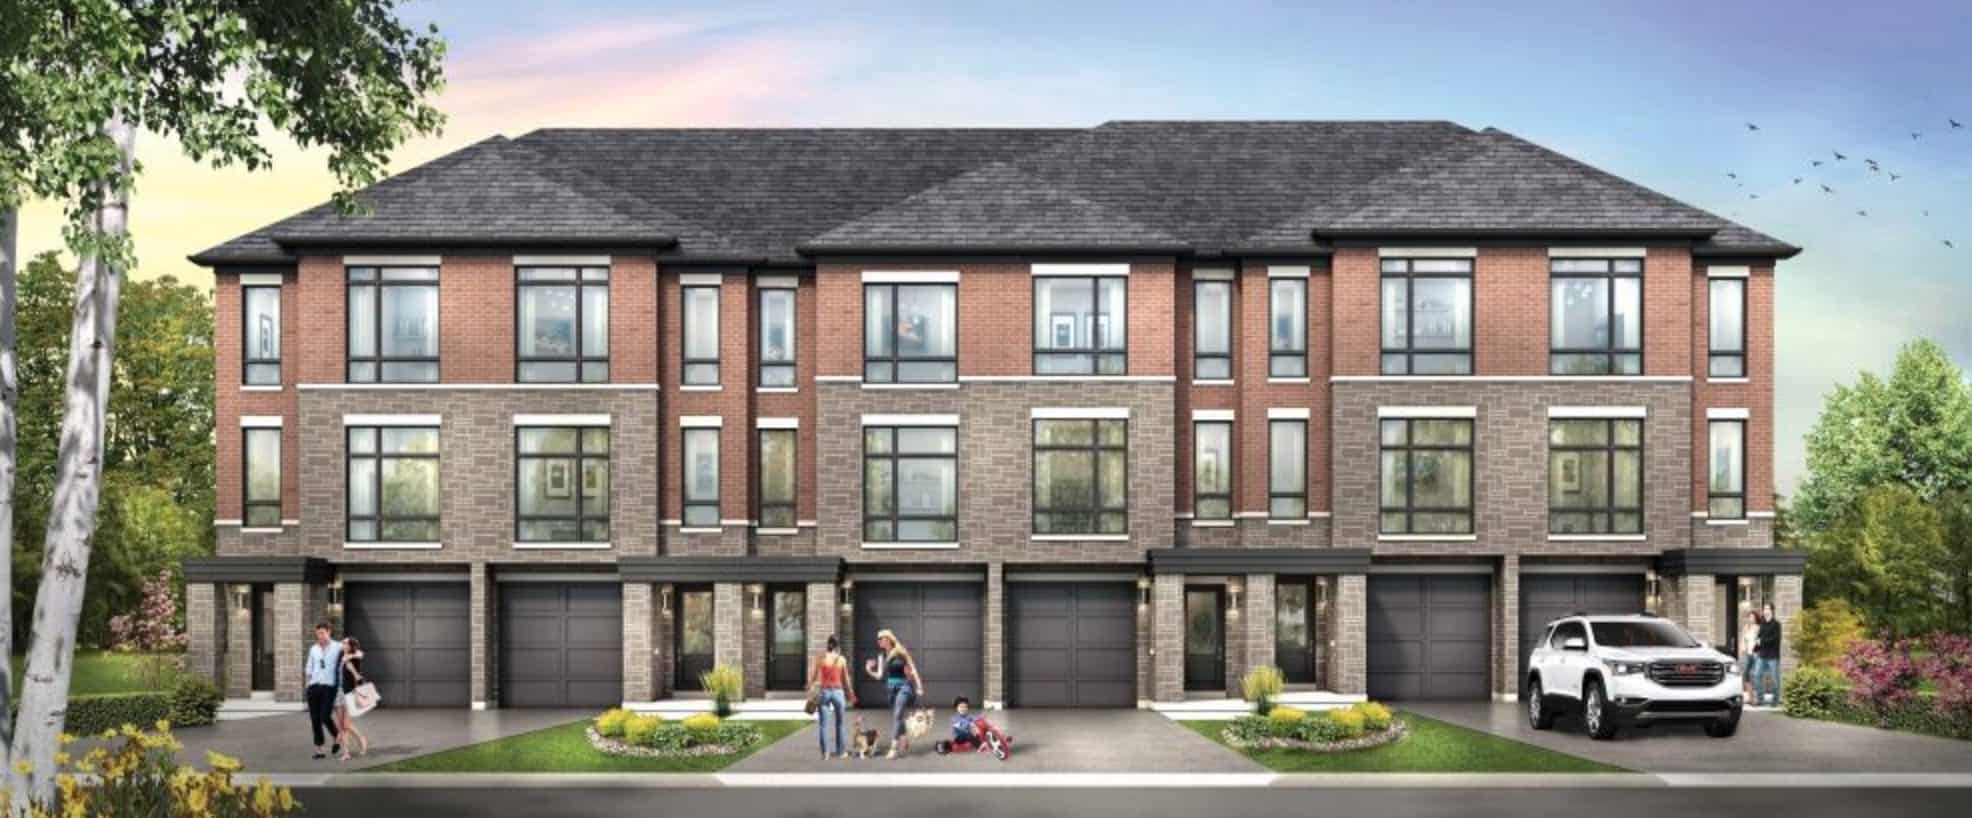 Total Towns Oshawa Front Rendering Image True Condos